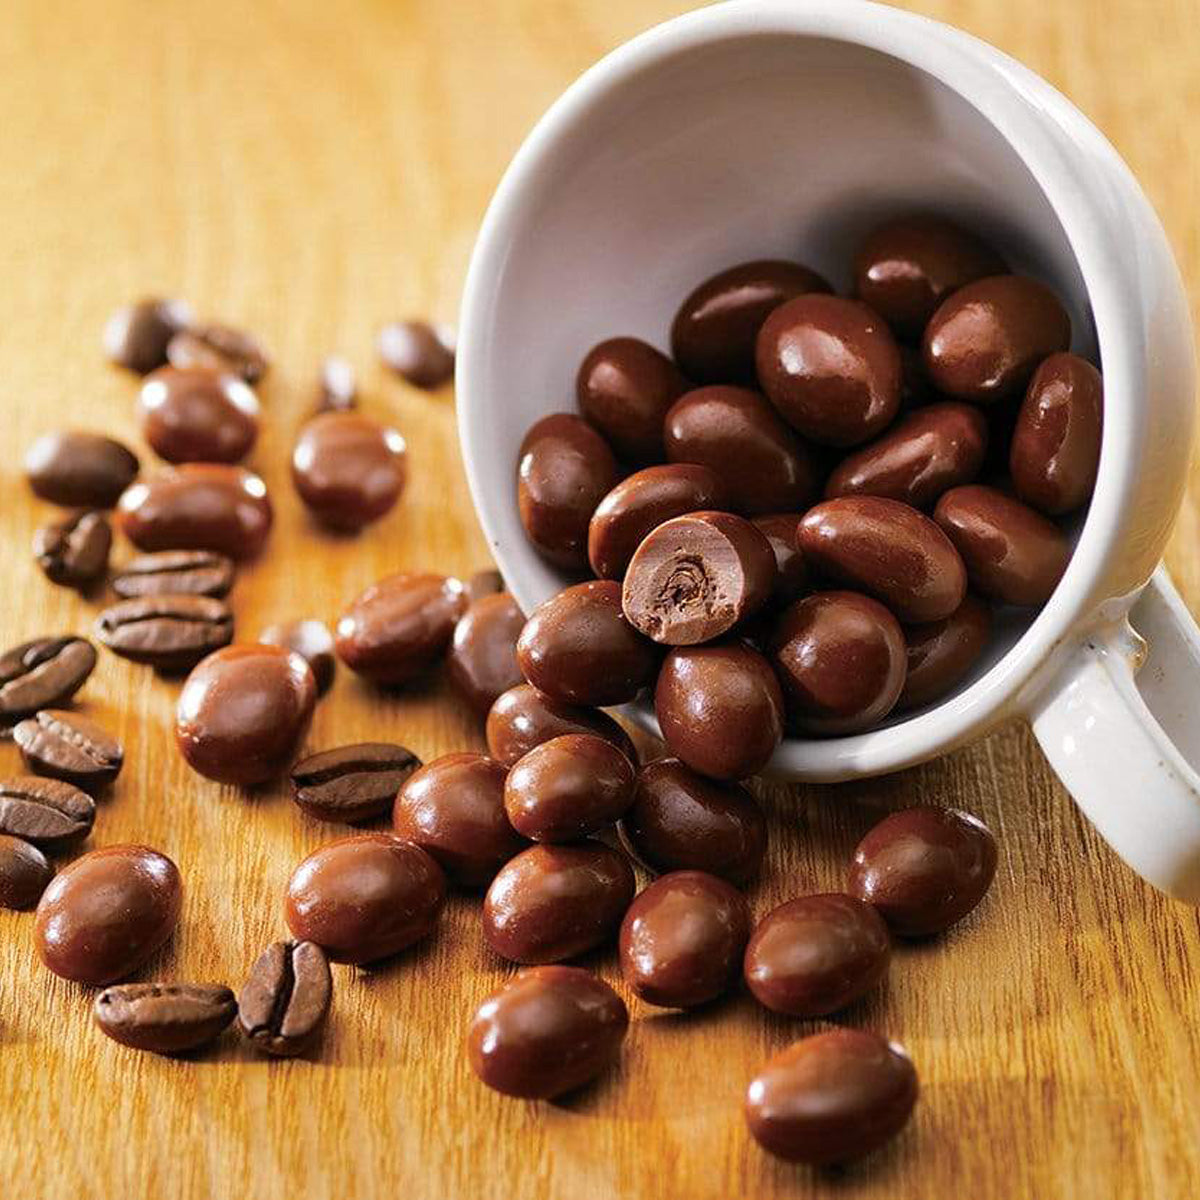 ROYCE' Chocolate - Coffee Beans Chocolate - Image shows brown chocolate-coated coffee beans. Accents include a white cup and a golden wooden background.